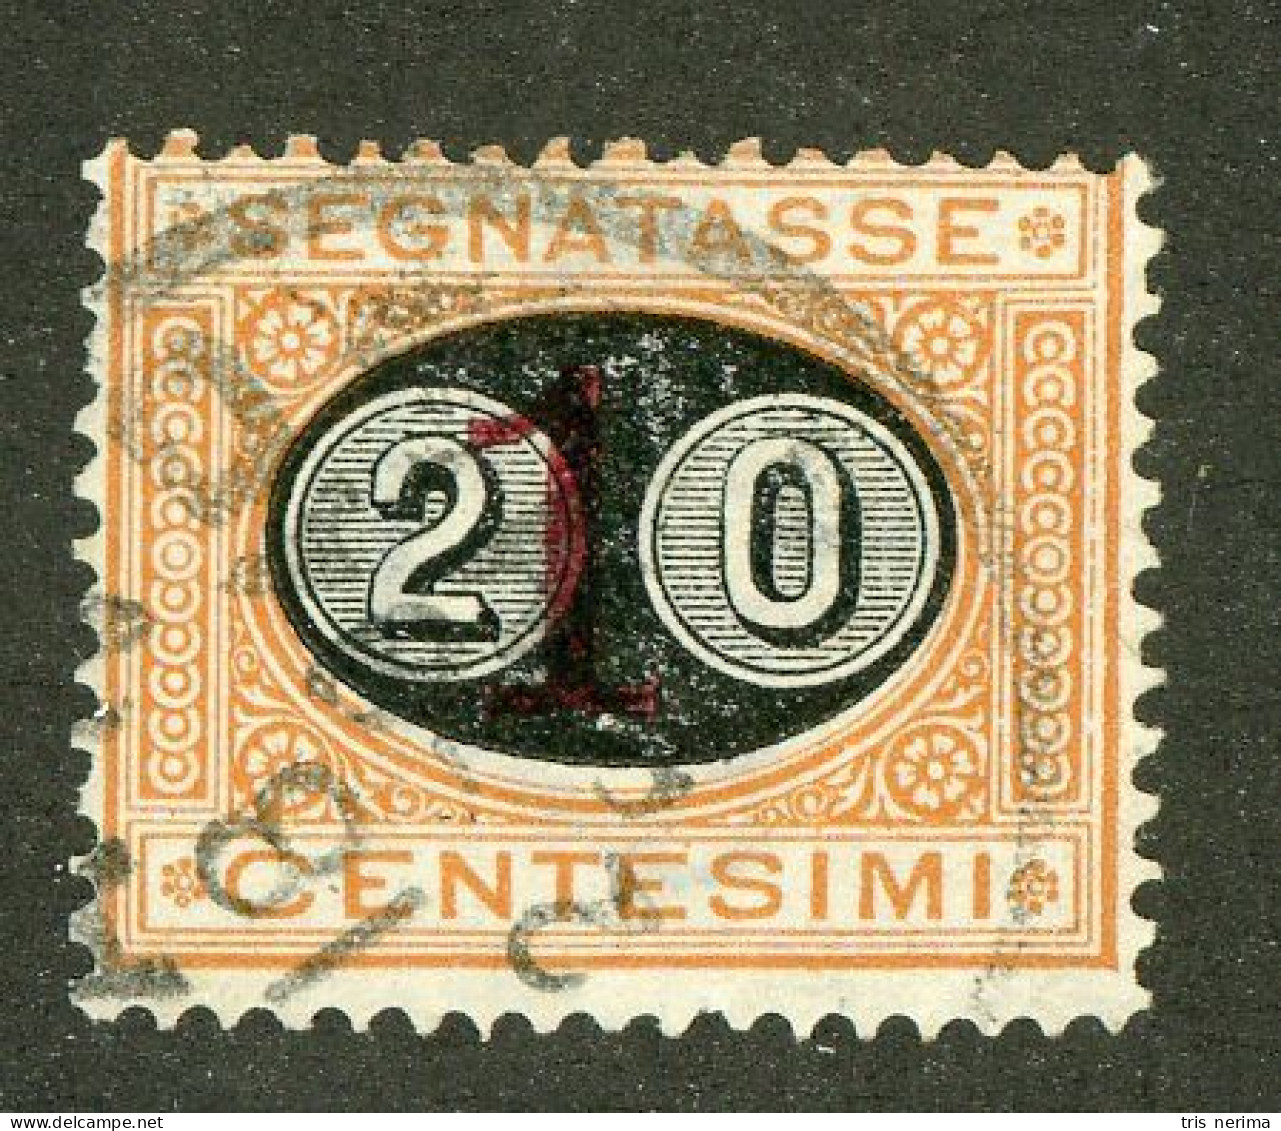 582 Italy 1890 Scott #J26 Used (Lower Bids 20% Off) - Postage Due